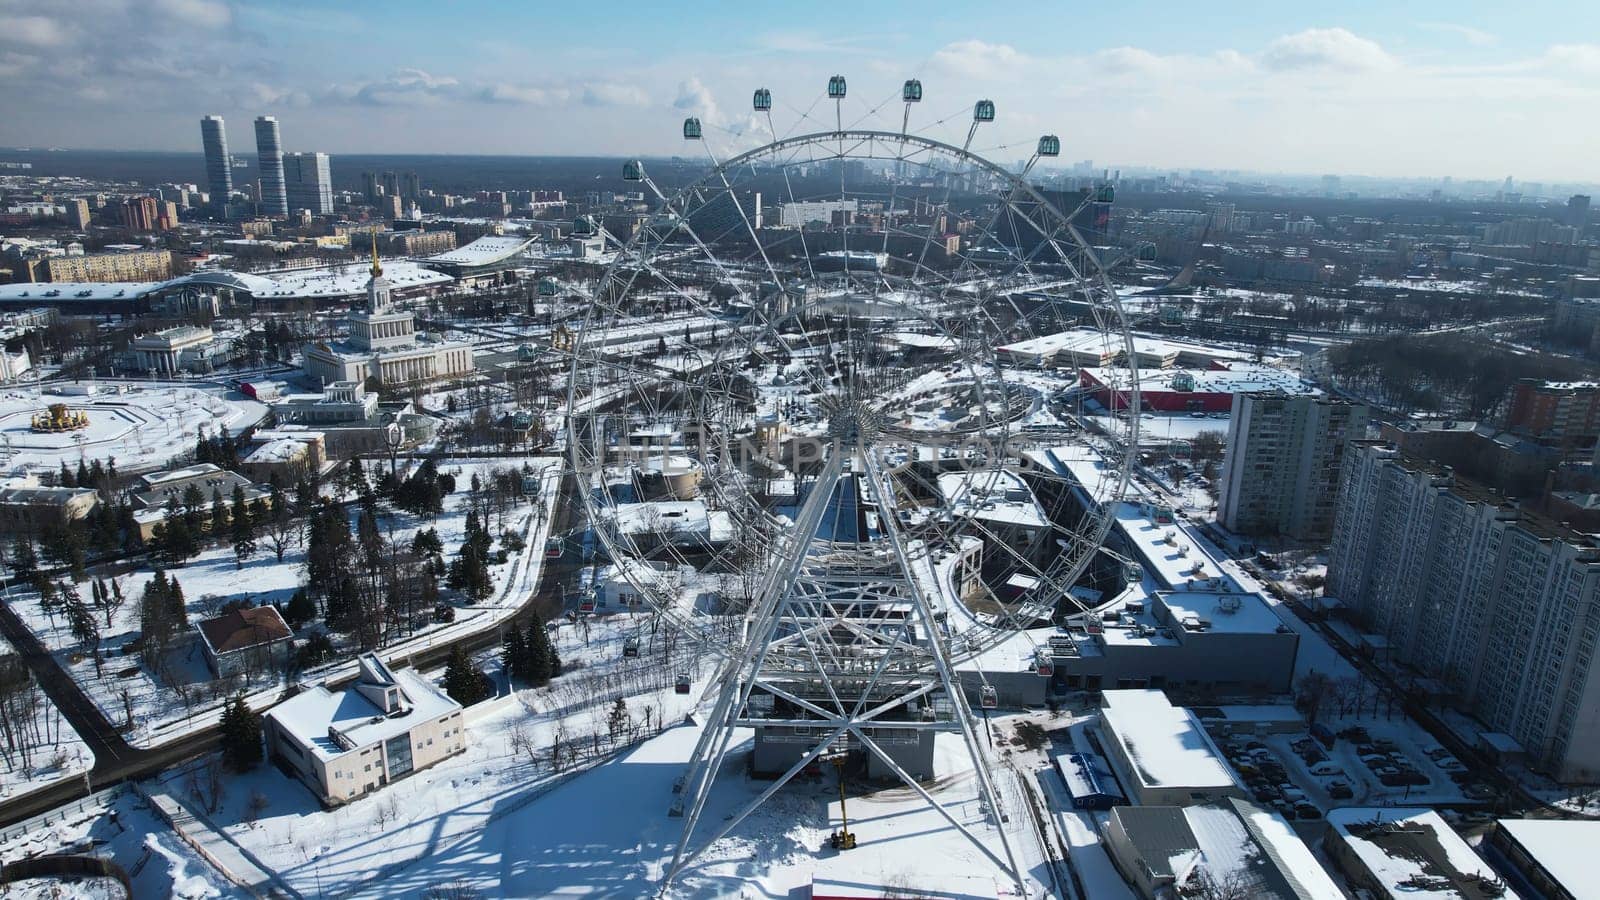 Top view of big Ferris wheel in winter. Creative. Beautiful urban landscape with Ferris wheel in city center in winter. Ferris wheel in center of big city on sunny winter day.